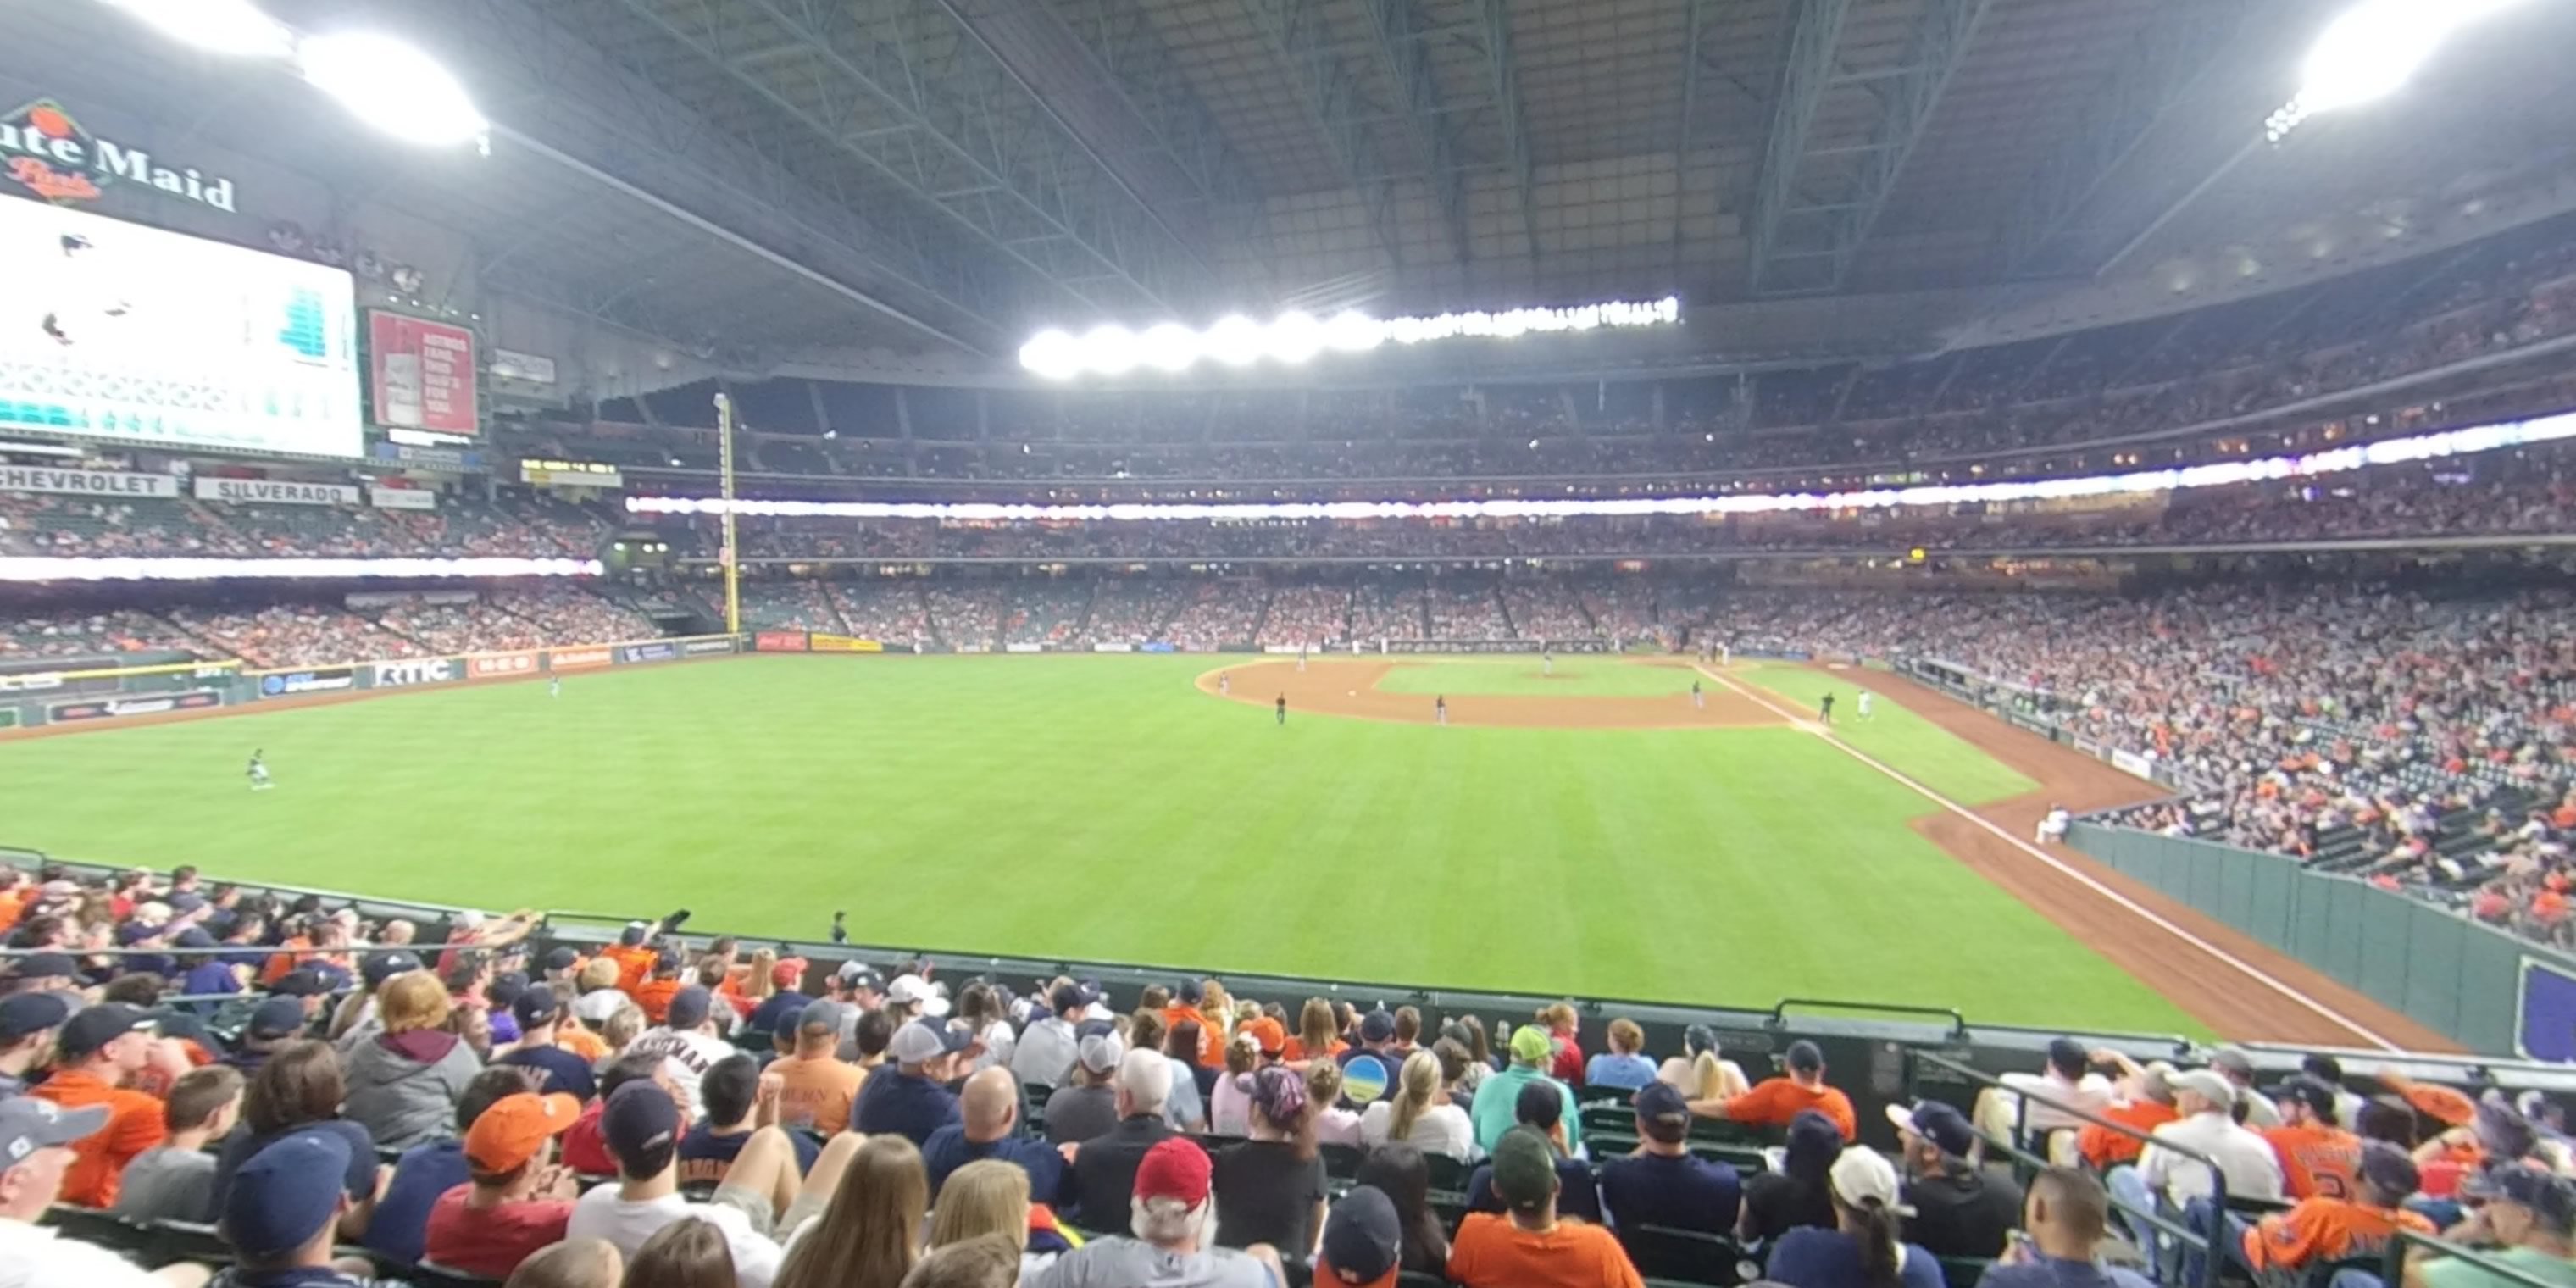 section 102 panoramic seat view  for baseball - minute maid park